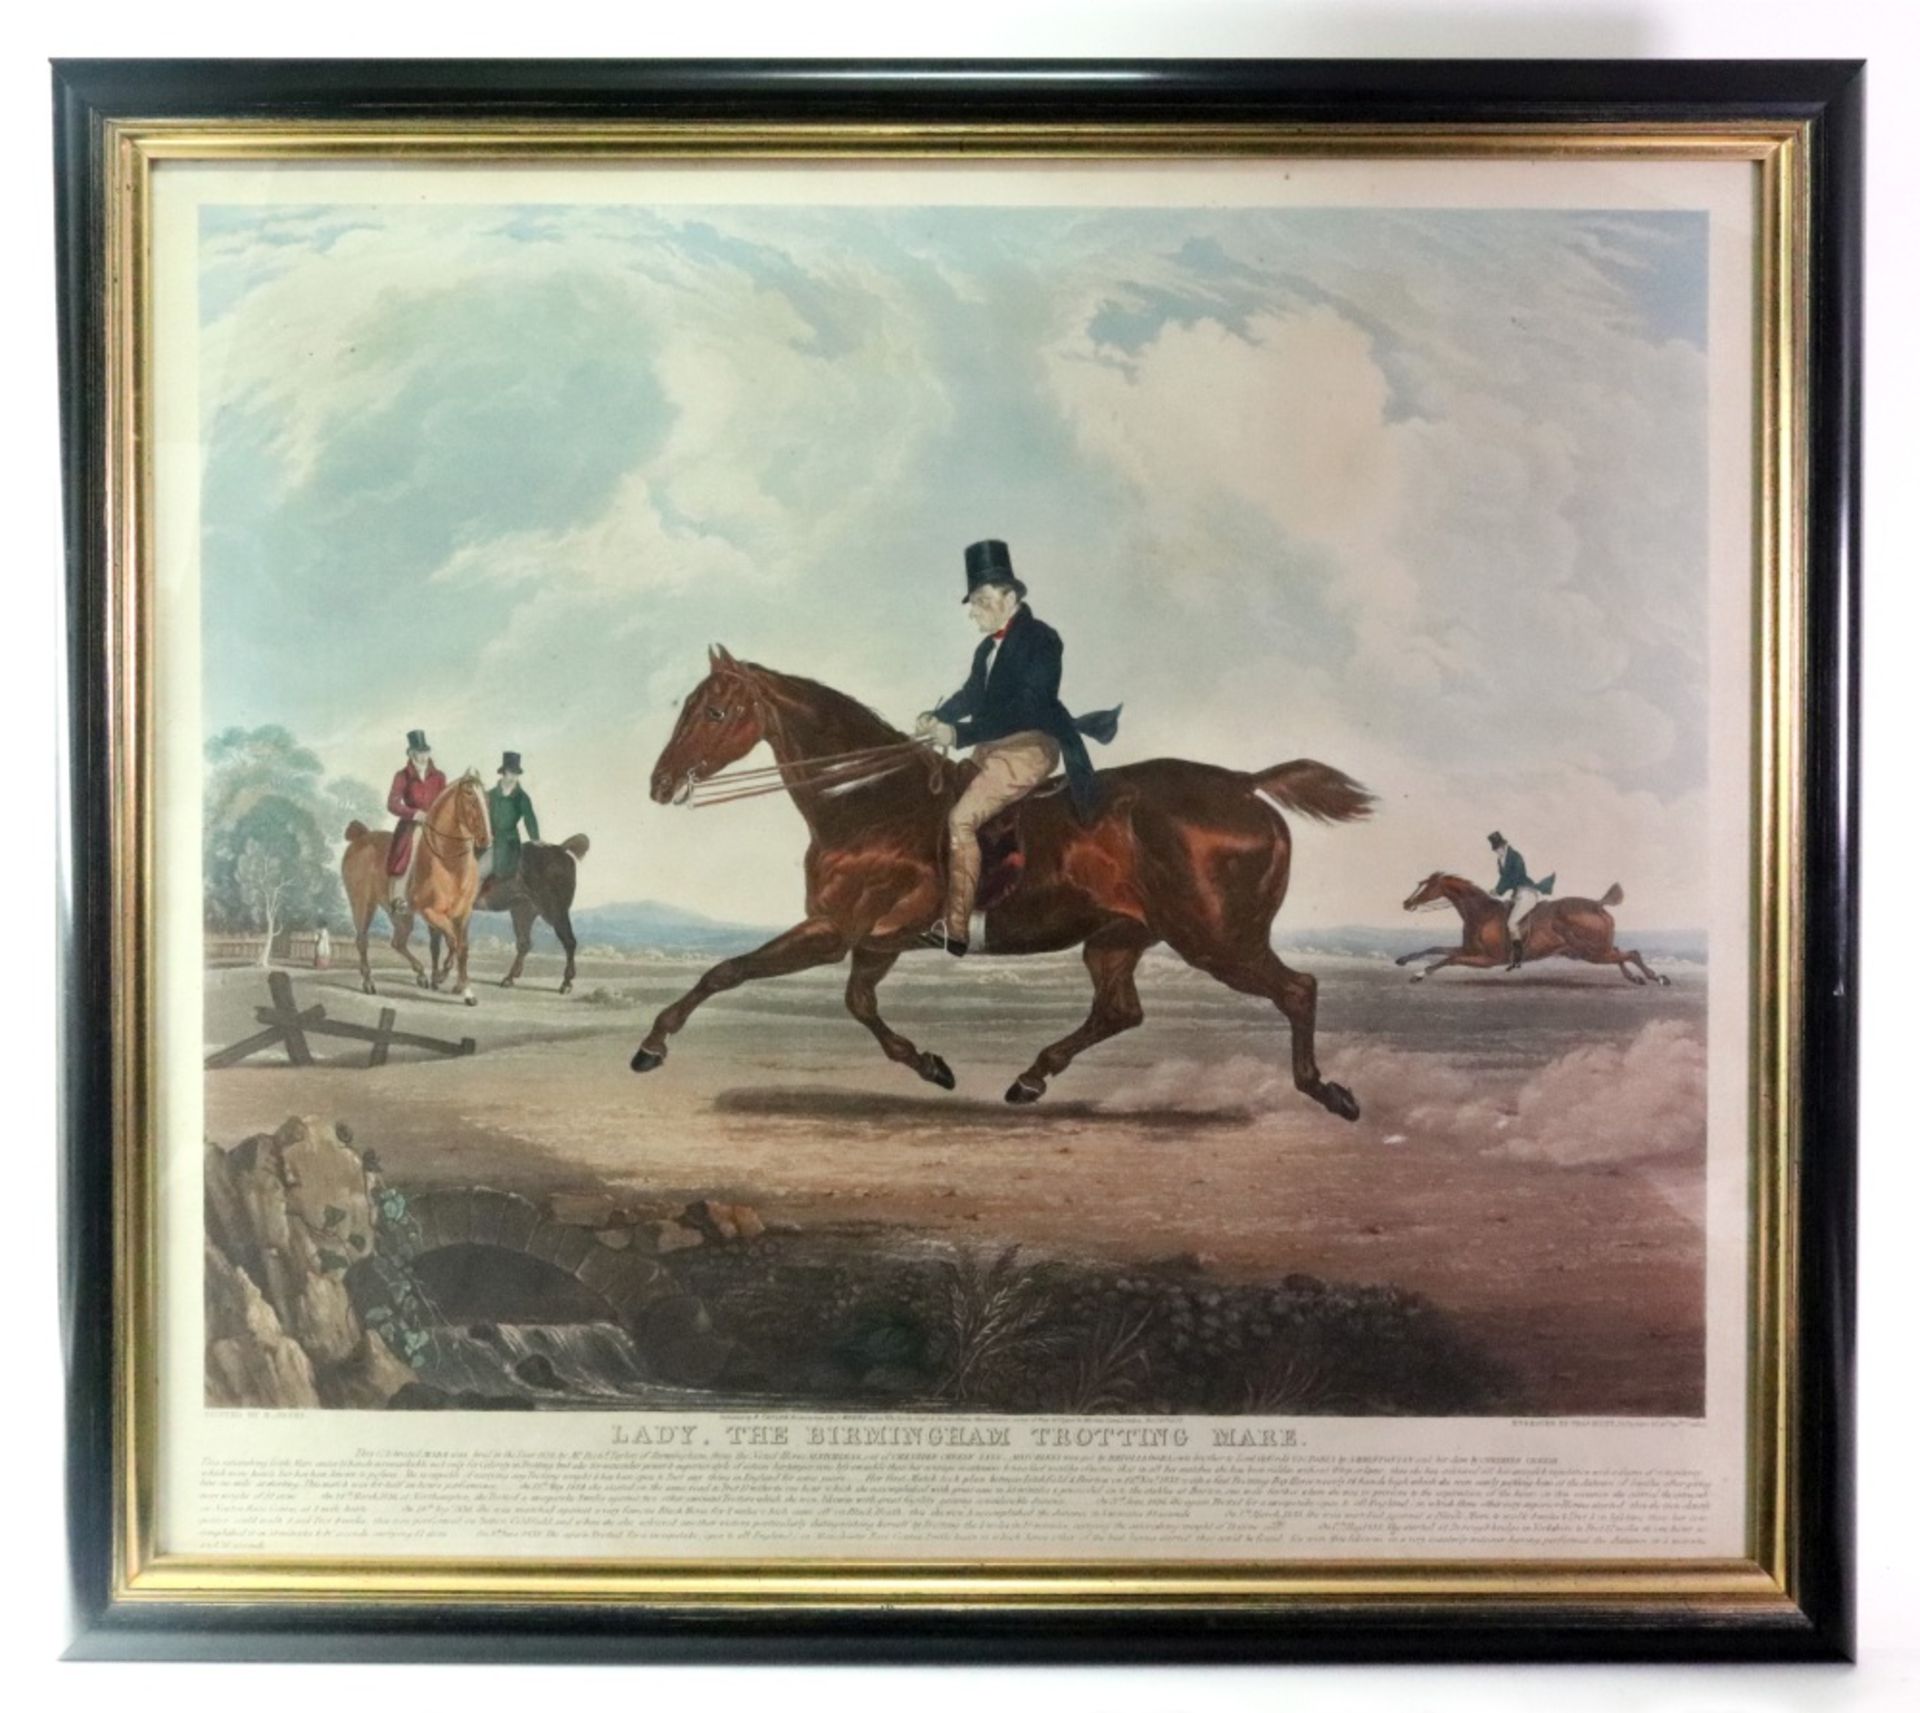 After R Jones, Lady, The Birmingham Trotting Mare, colour engraving by Charles Hunt, - Image 2 of 2